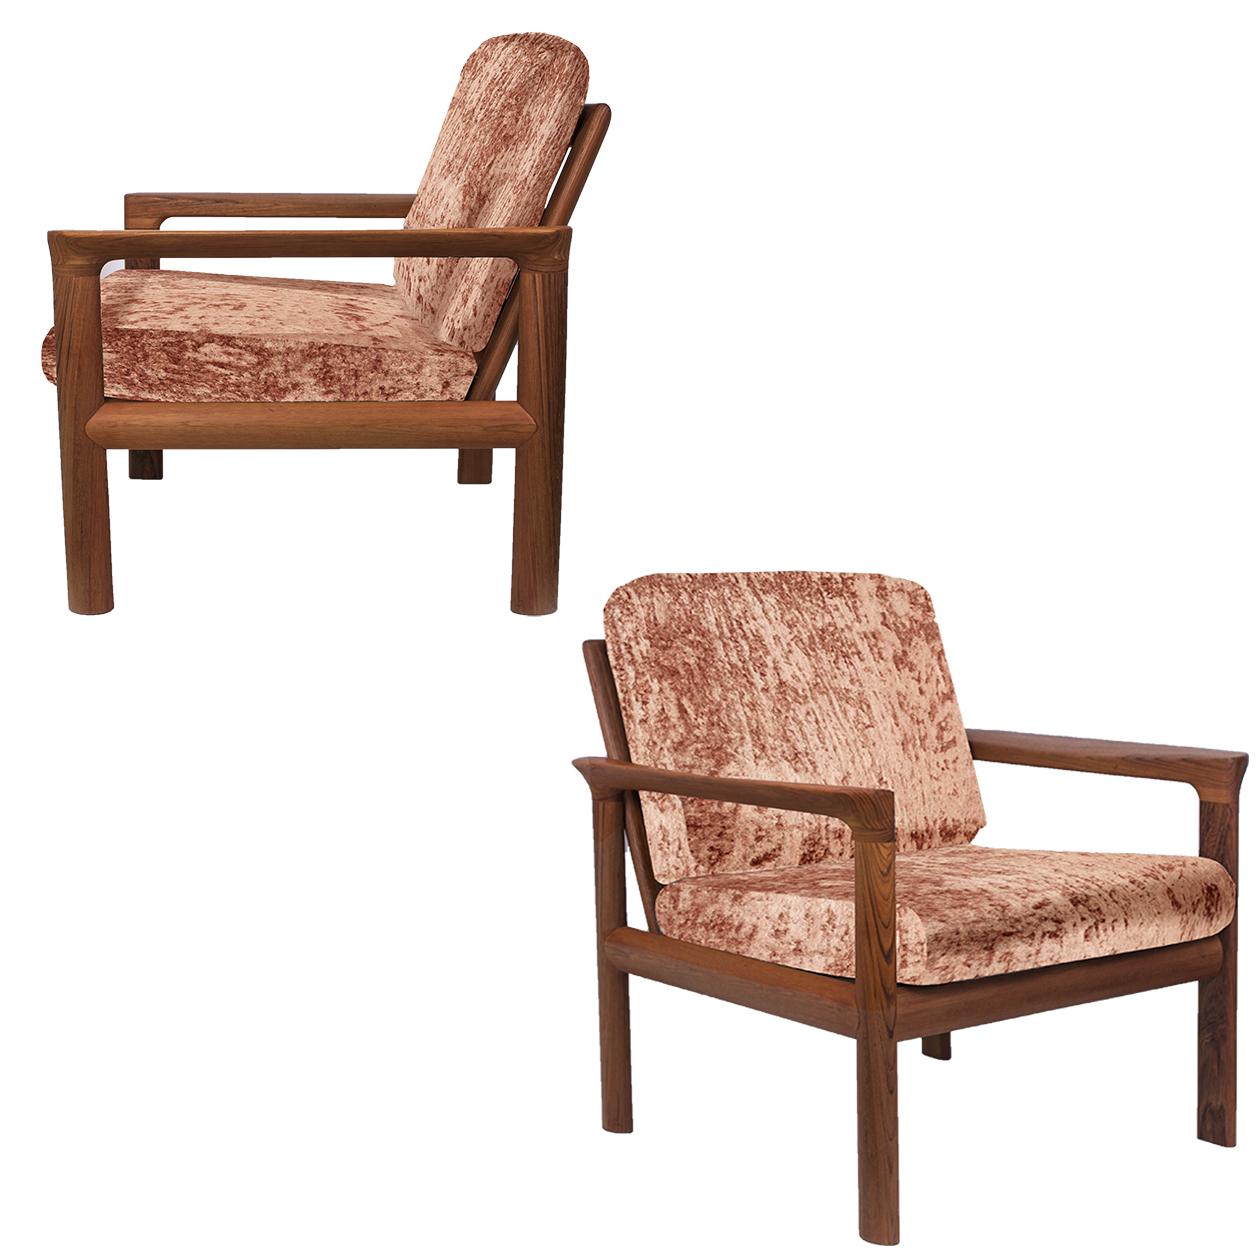 This pair of lounge chairs are designed by Sven Ellekaer for Komfort, Denmark in the 1960s. 
It features a beautiful shaped solid teak frame with new unique luxurious velvet. The chairs are both comfortable and in profusely in there design.